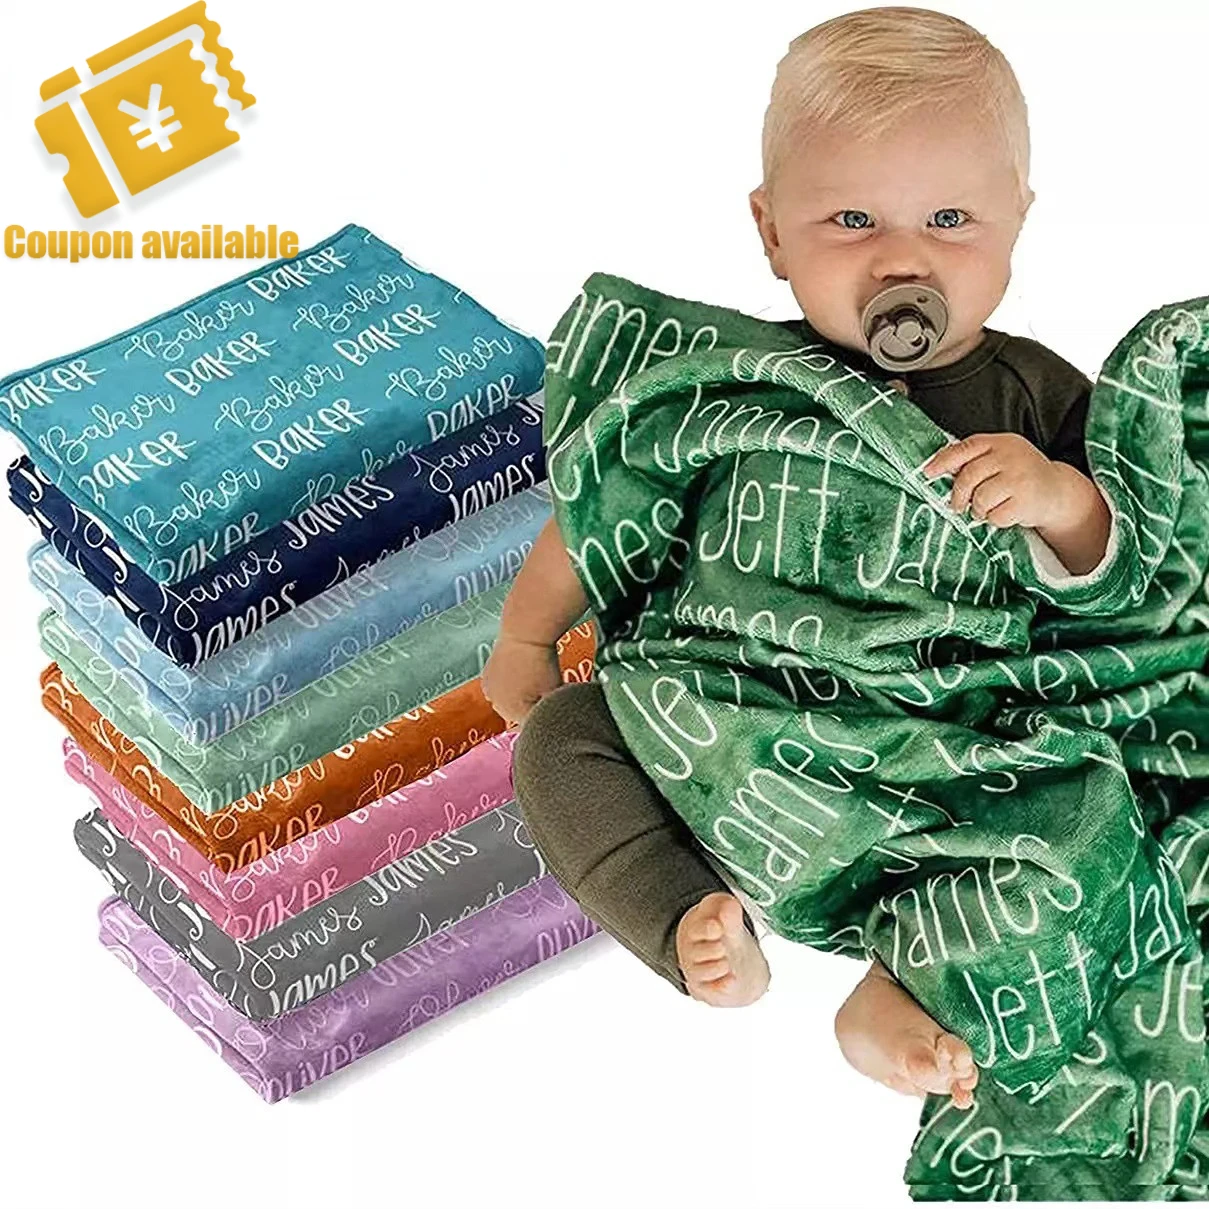 Customized Name Flannel Blanket Adult and Children Baby Soft Blanket Exclusive Woolen Blanket Blanket Wrapped birthday Gift